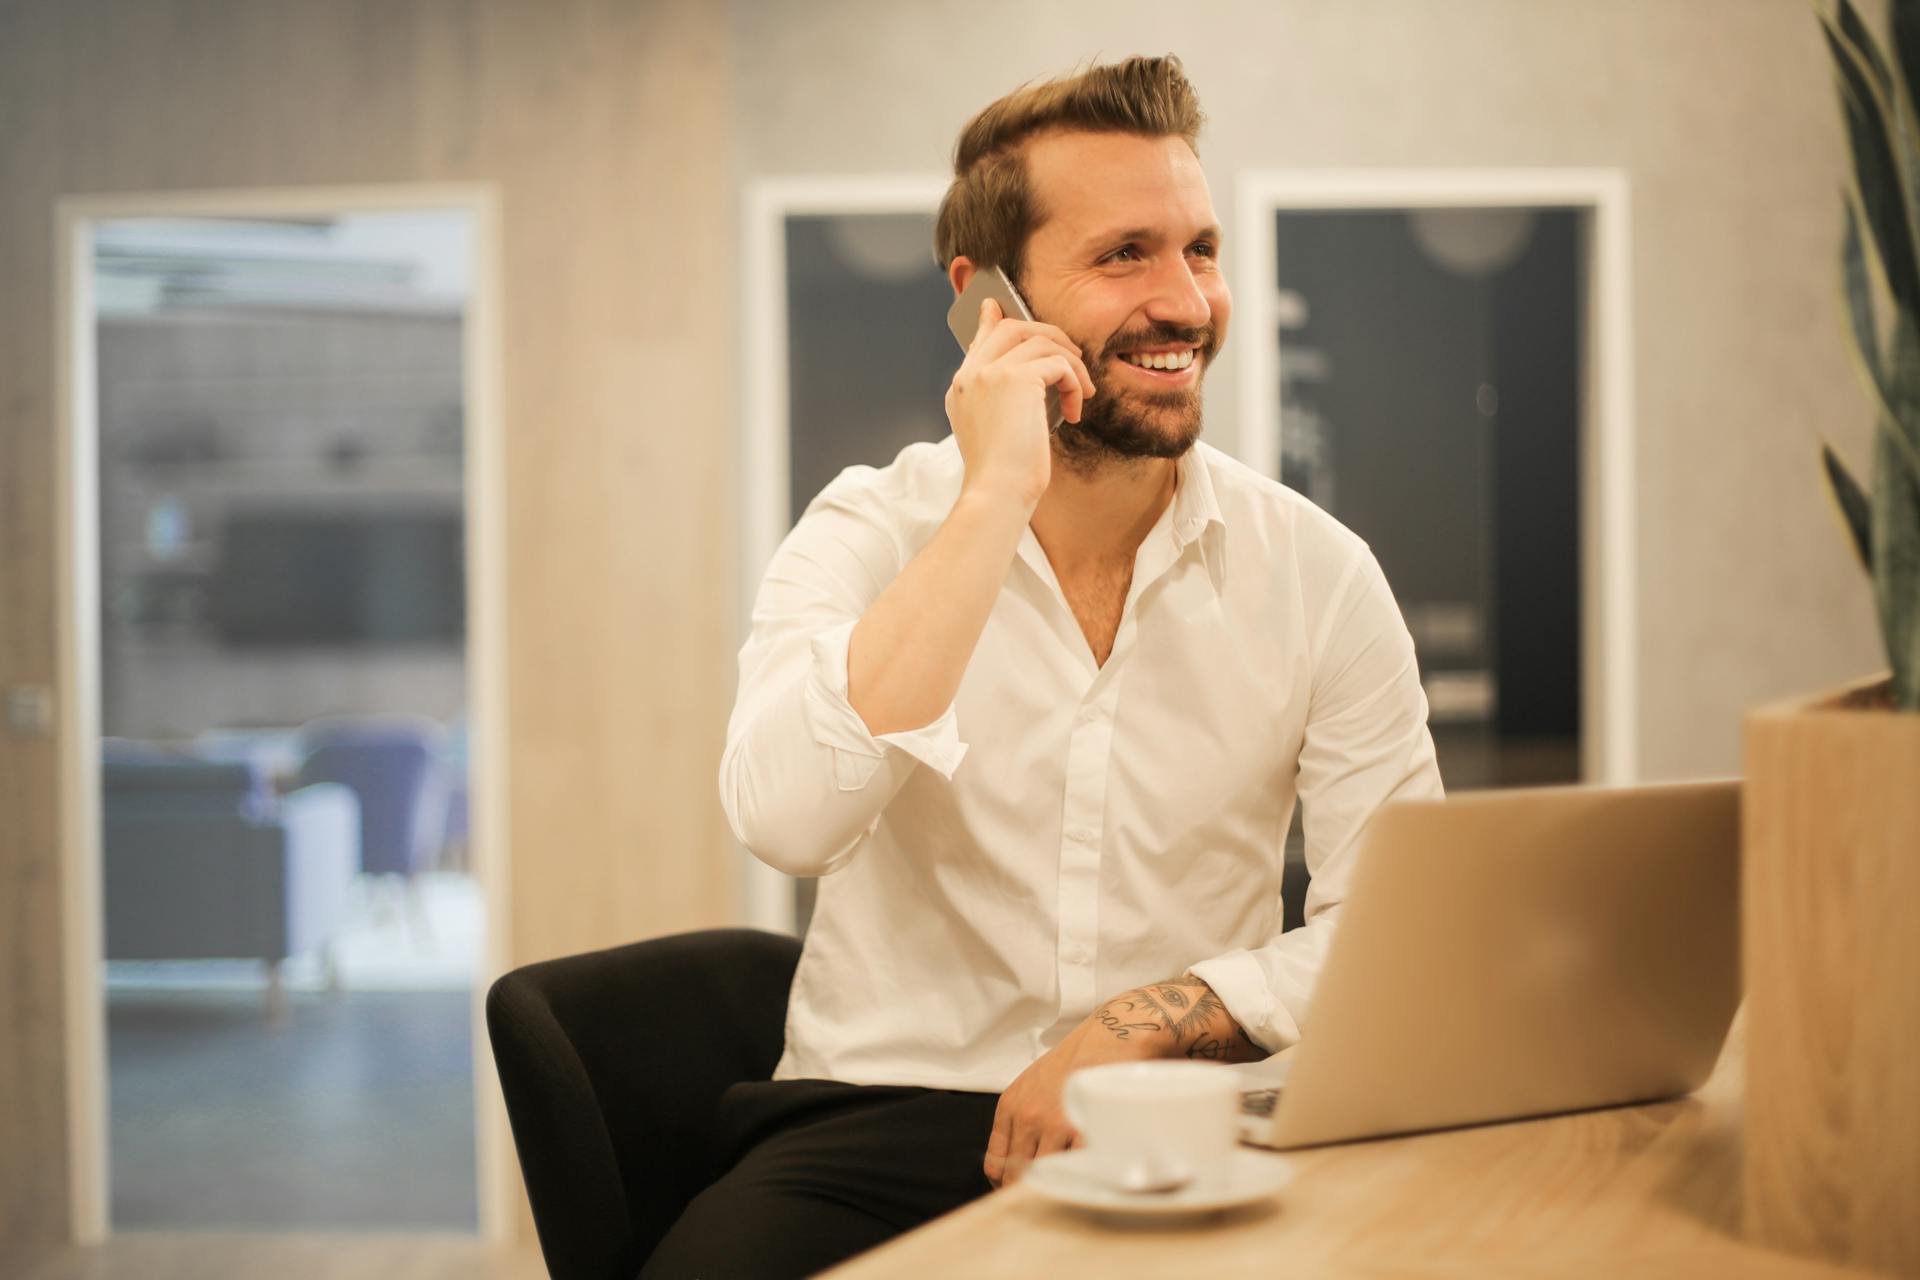 How To Improve B2B Cold Calling Success Rates